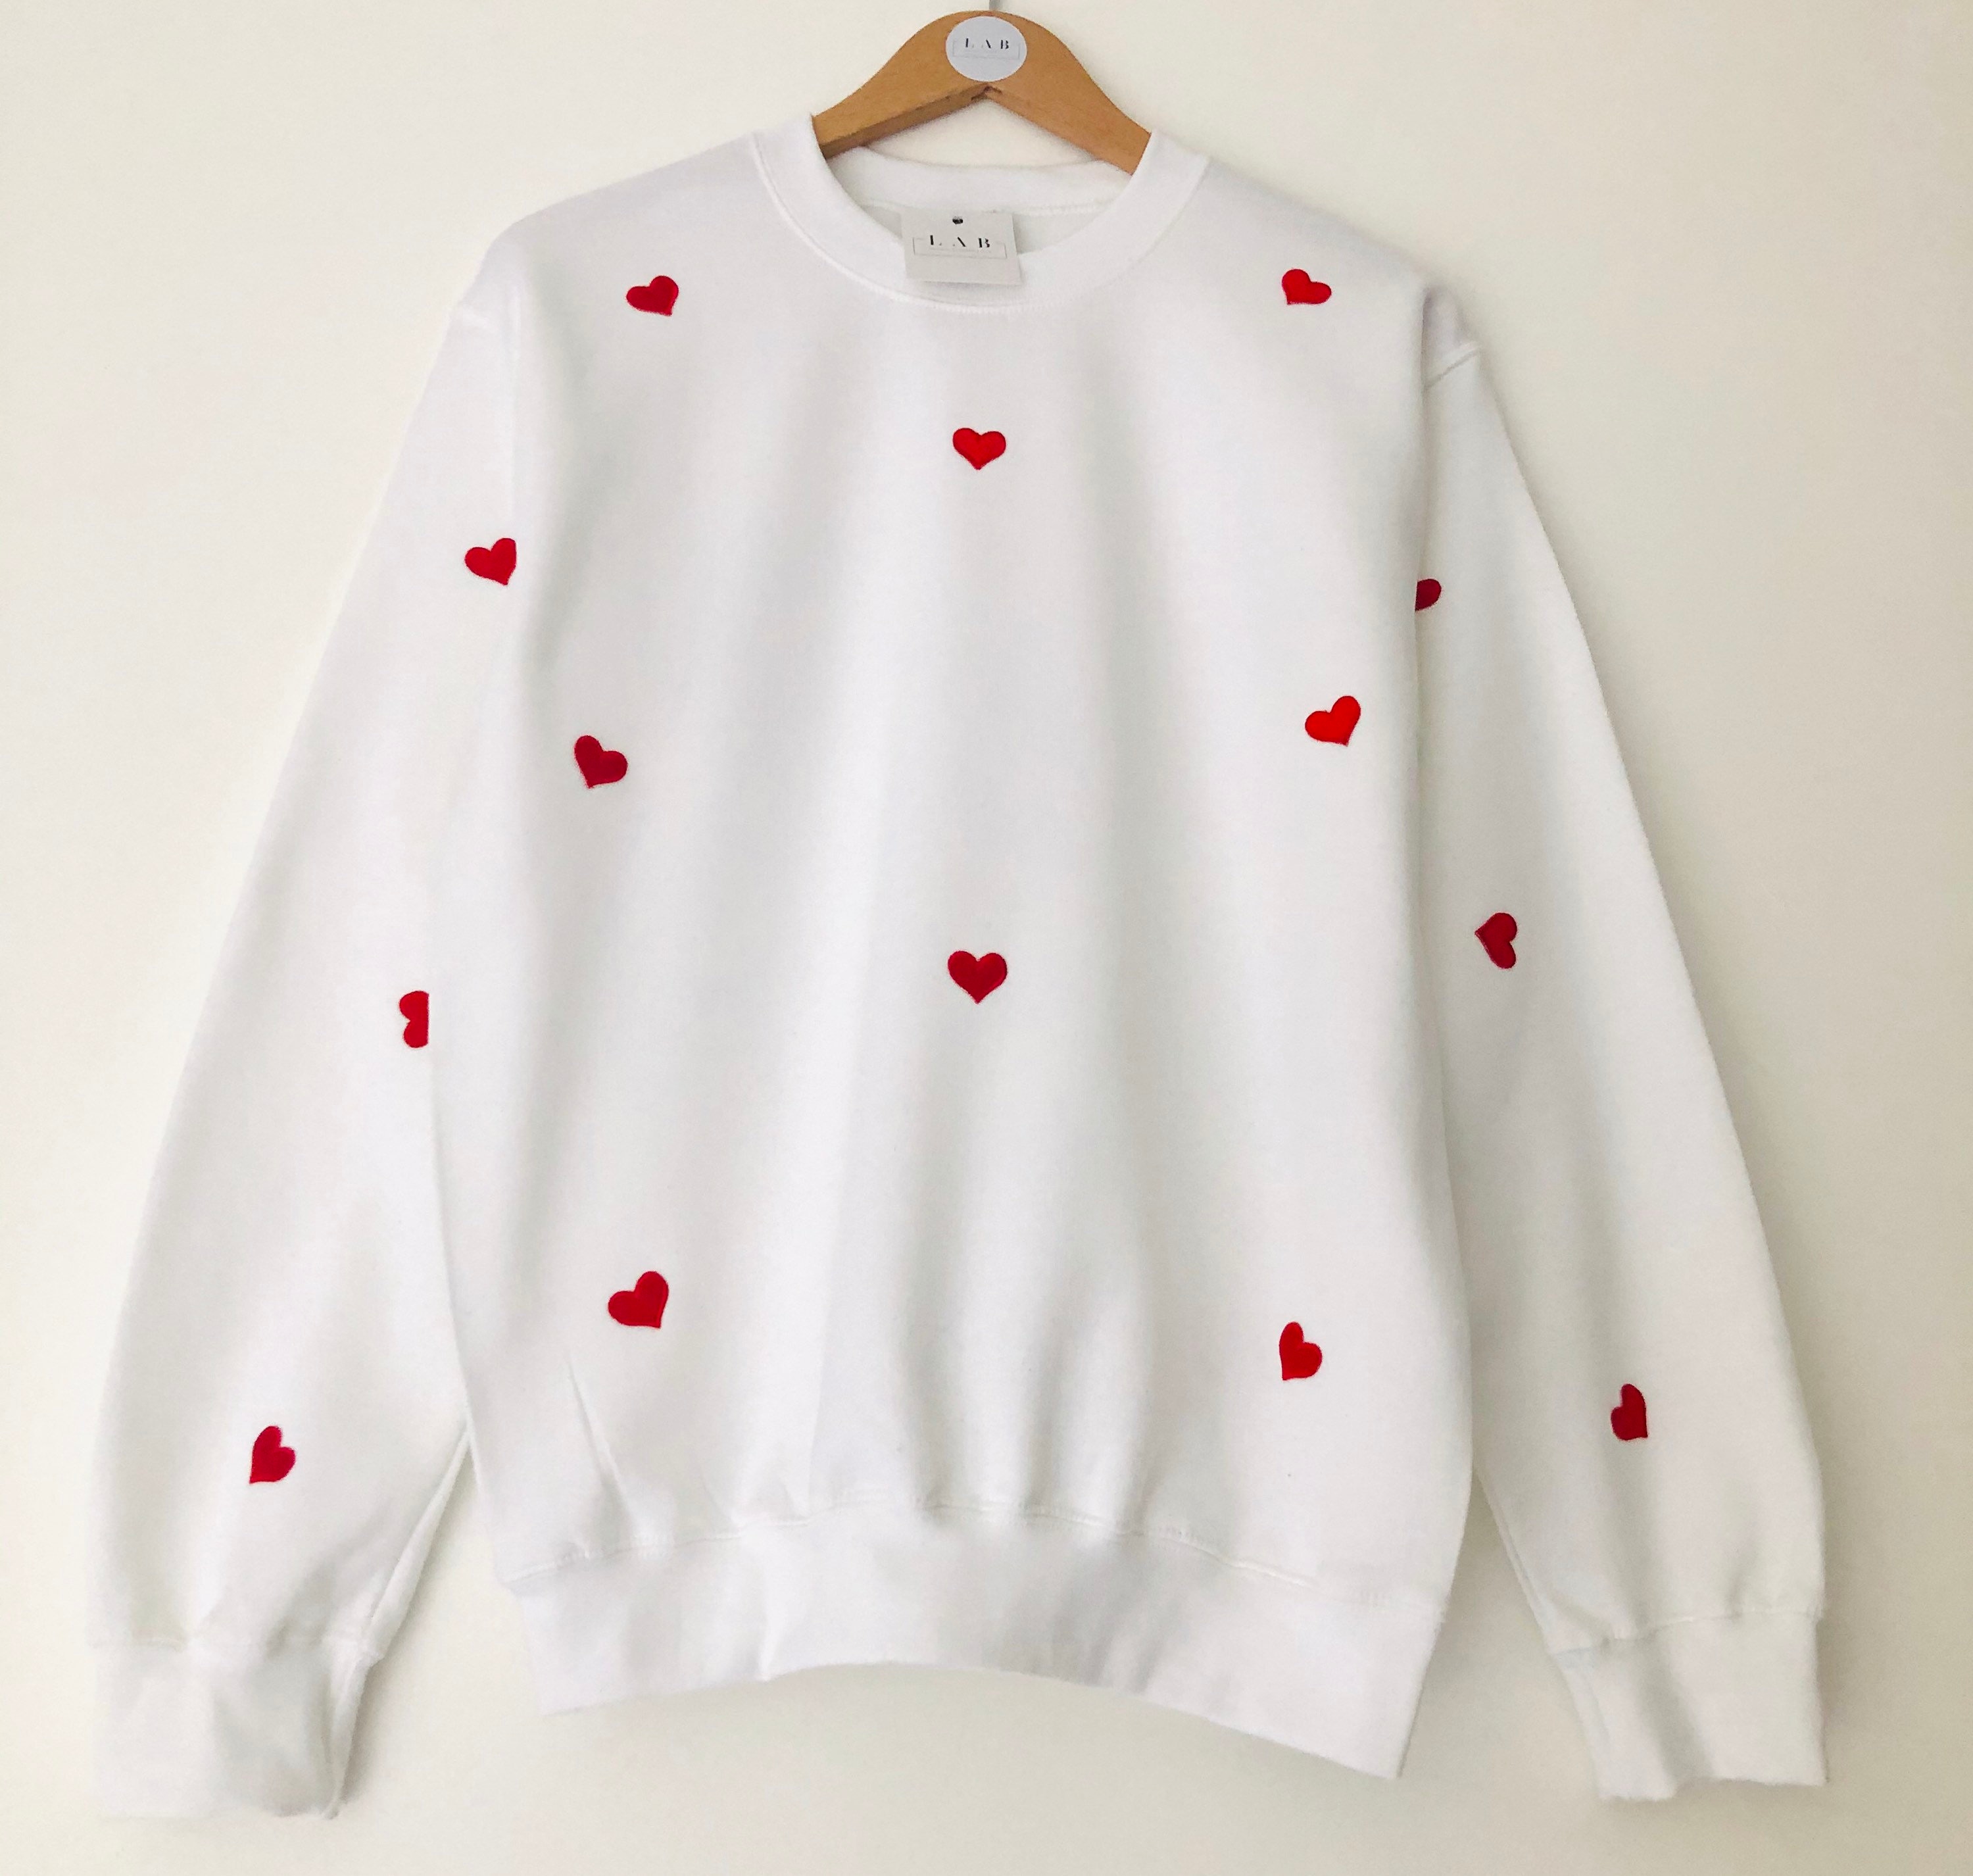 Embroidered Hearts Jumper - Etsy UK